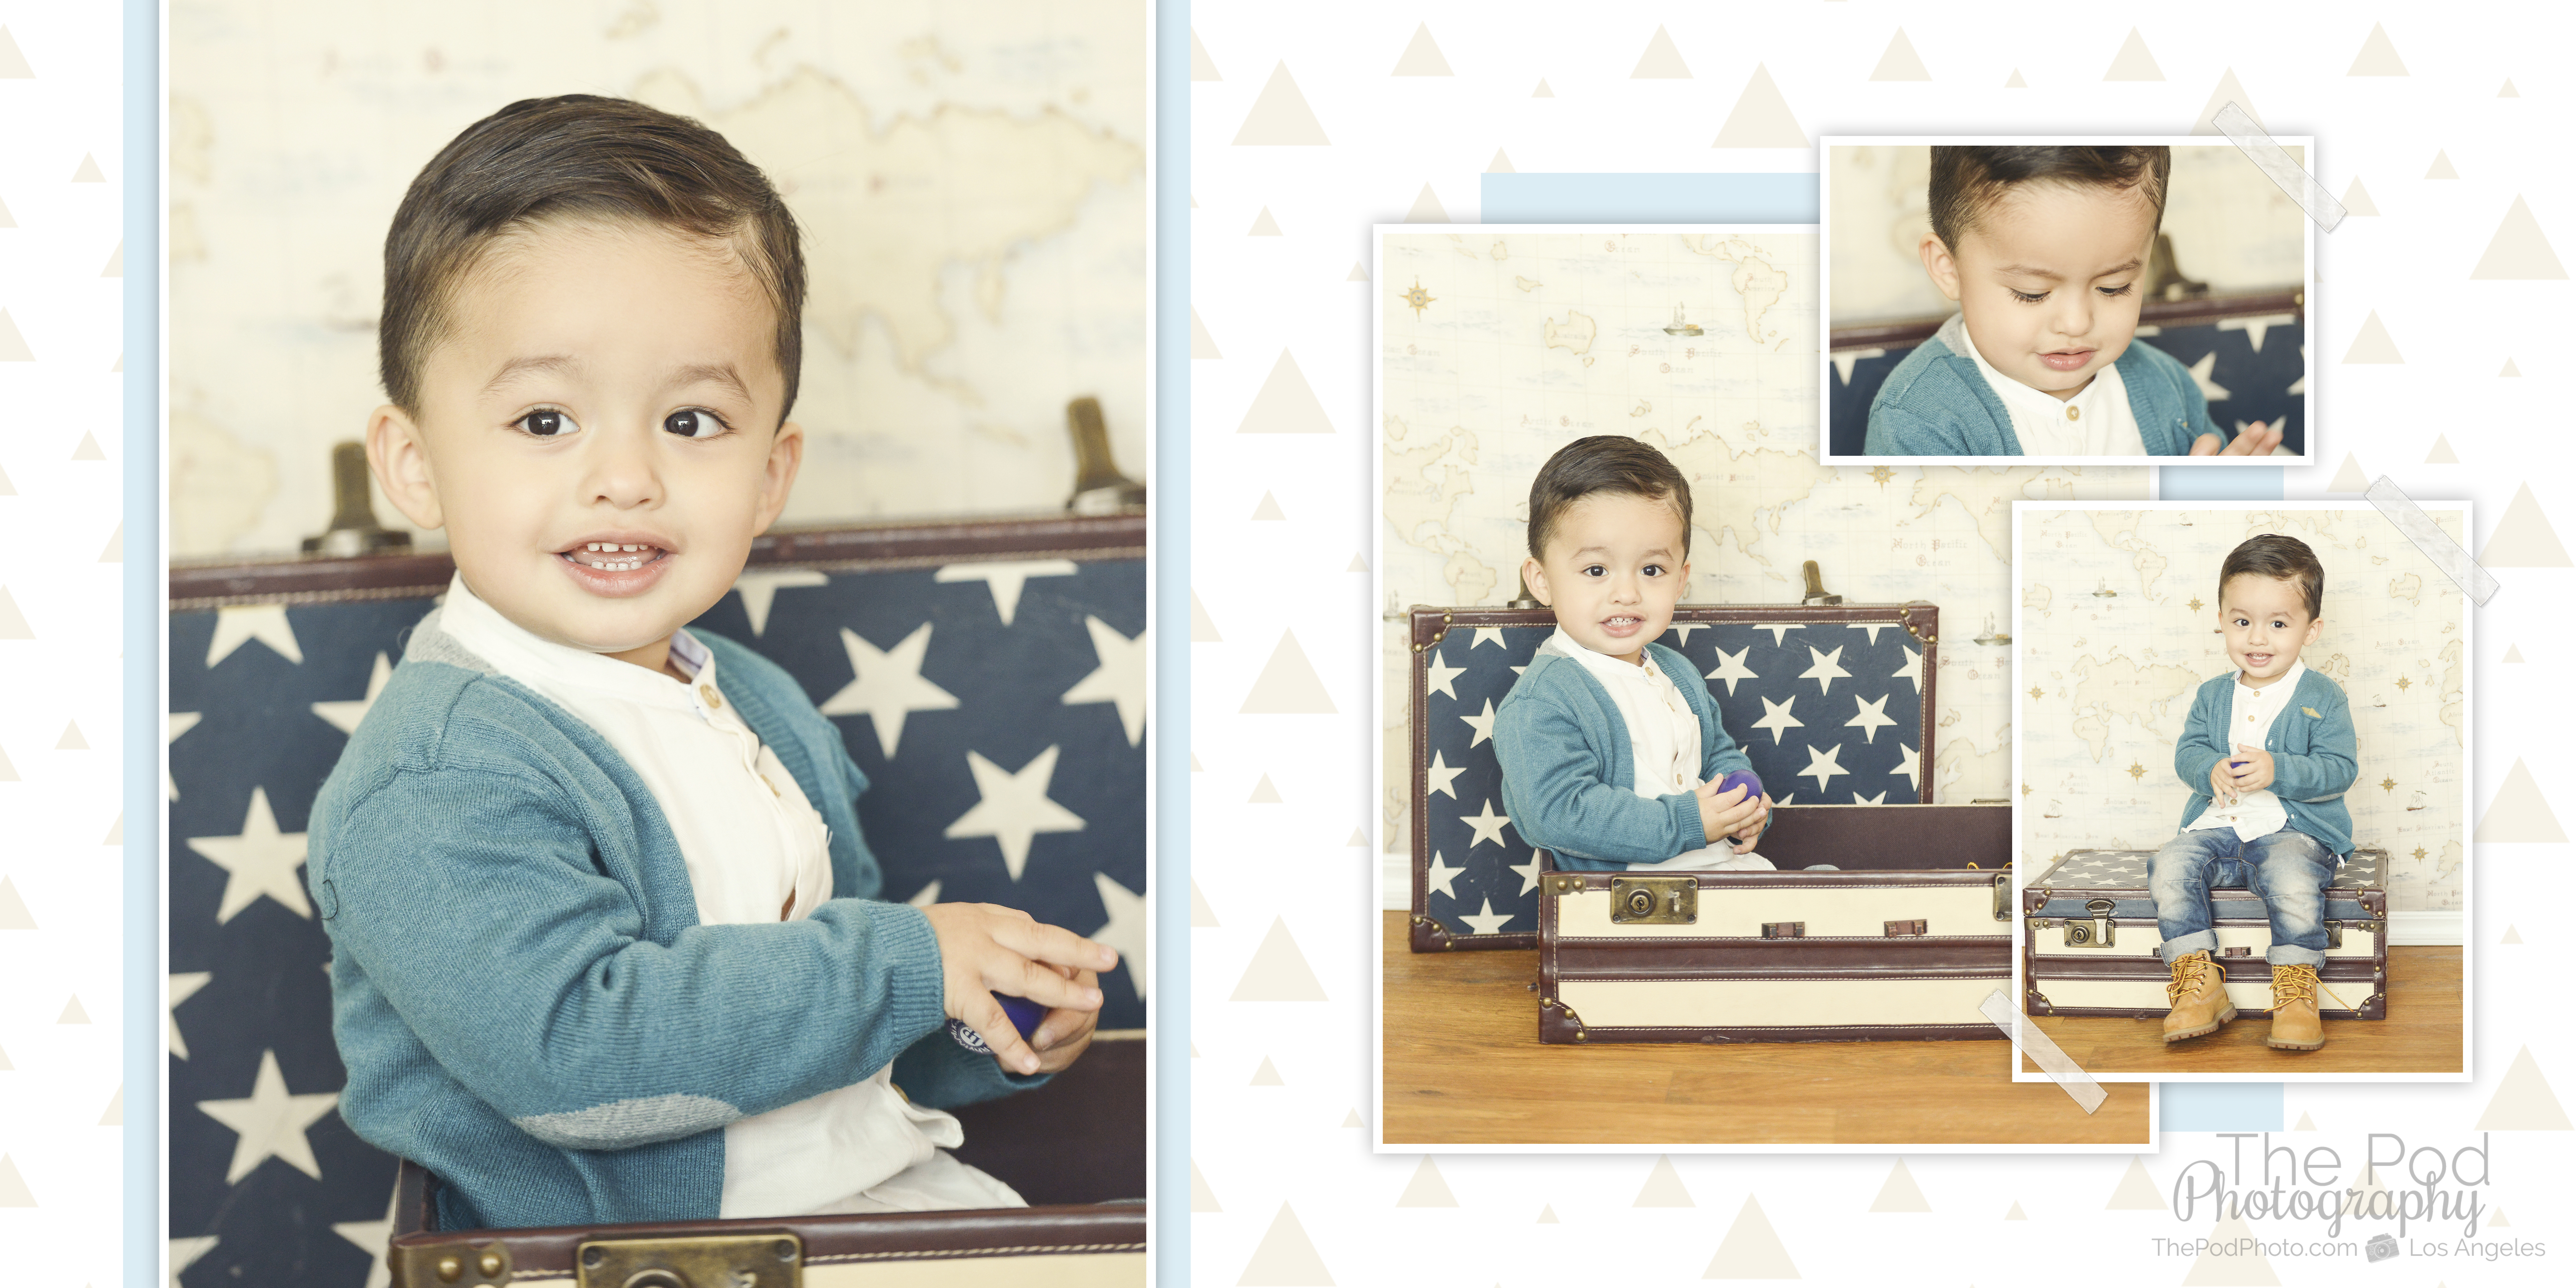 Family Photo Album  Brentwood Baby & Kids Photographer - Los Angeles based  photo studio, The Pod Photography, specializing in maternity, newborn,  baby, first birthday cake smash and family pictures.